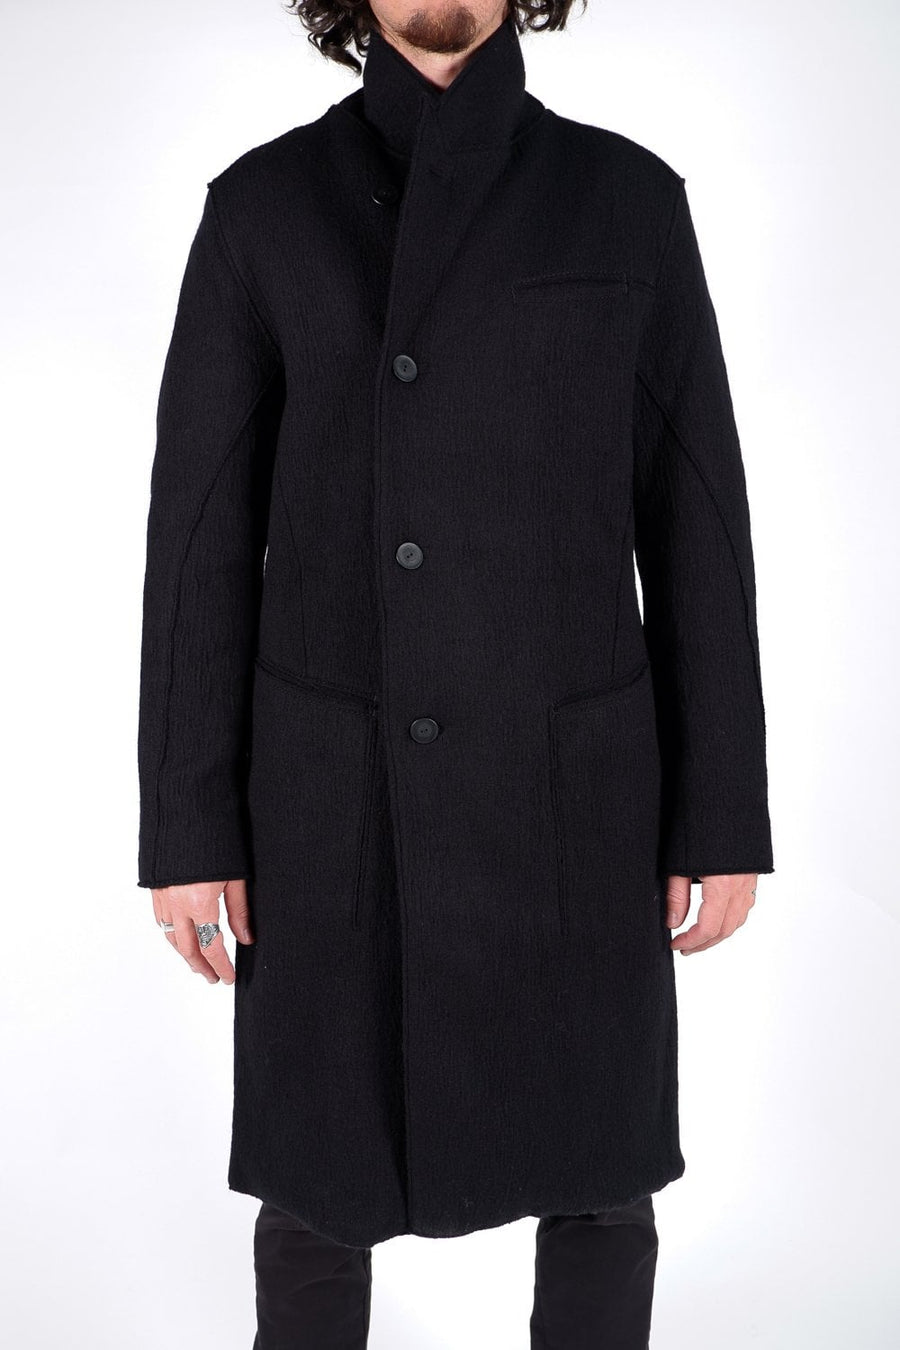 Buy the Transit Long Wool Coat in Black at Intro. Spend £50 for free UK delivery. Official stockists. We ship worldwide.